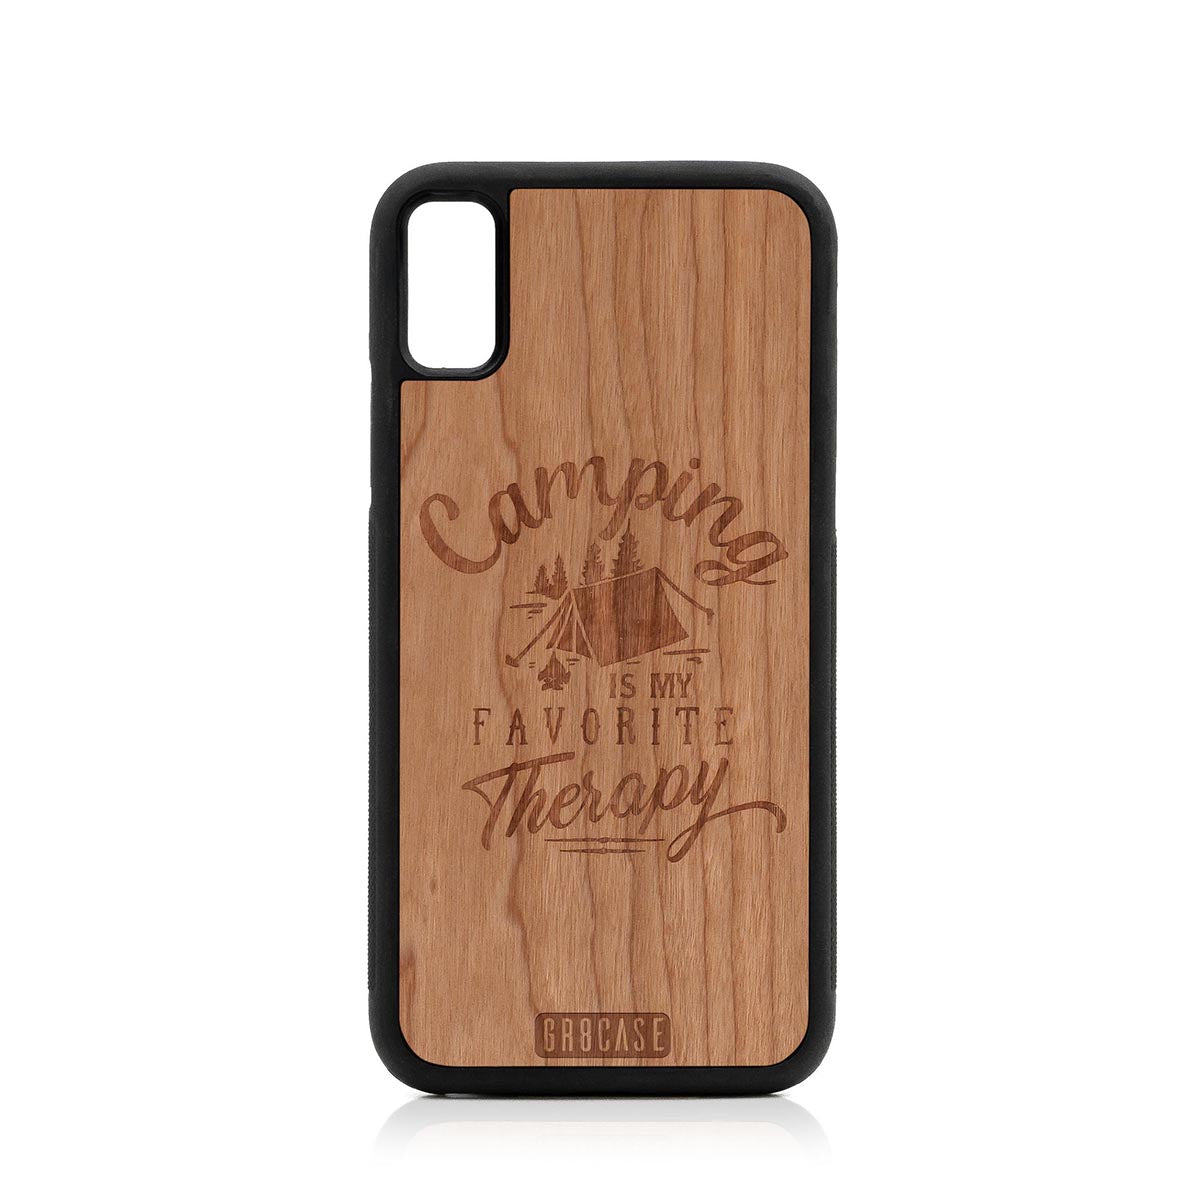 Camping Is My Favorite Therapy Design Wood Case For iPhone XS Max by GR8CASE